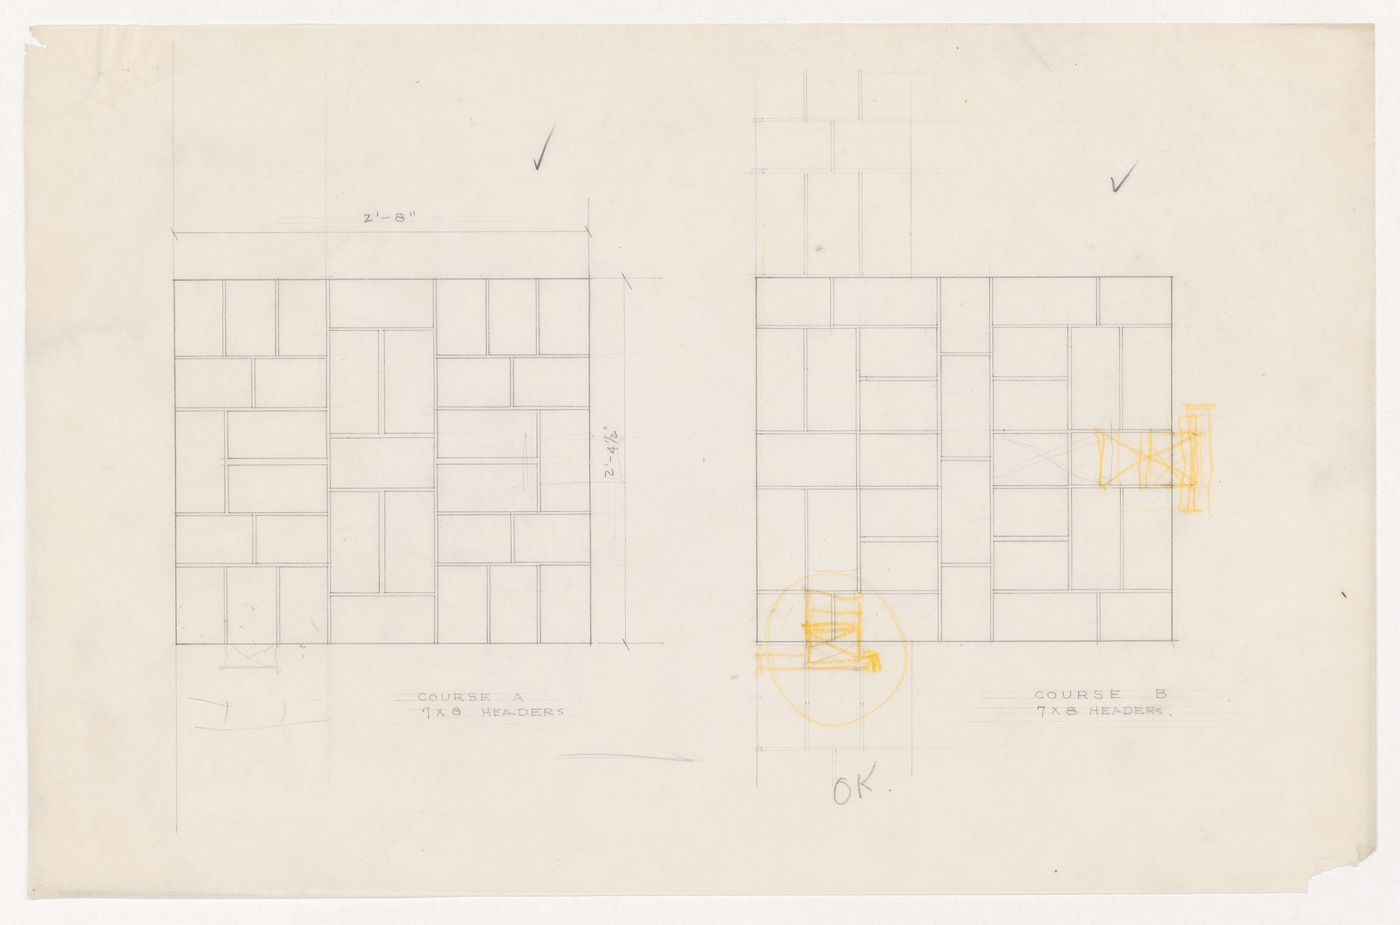 Cross sections for brick coursing for the Metallurgy Building, Illinois Institute of Technology, Chicago